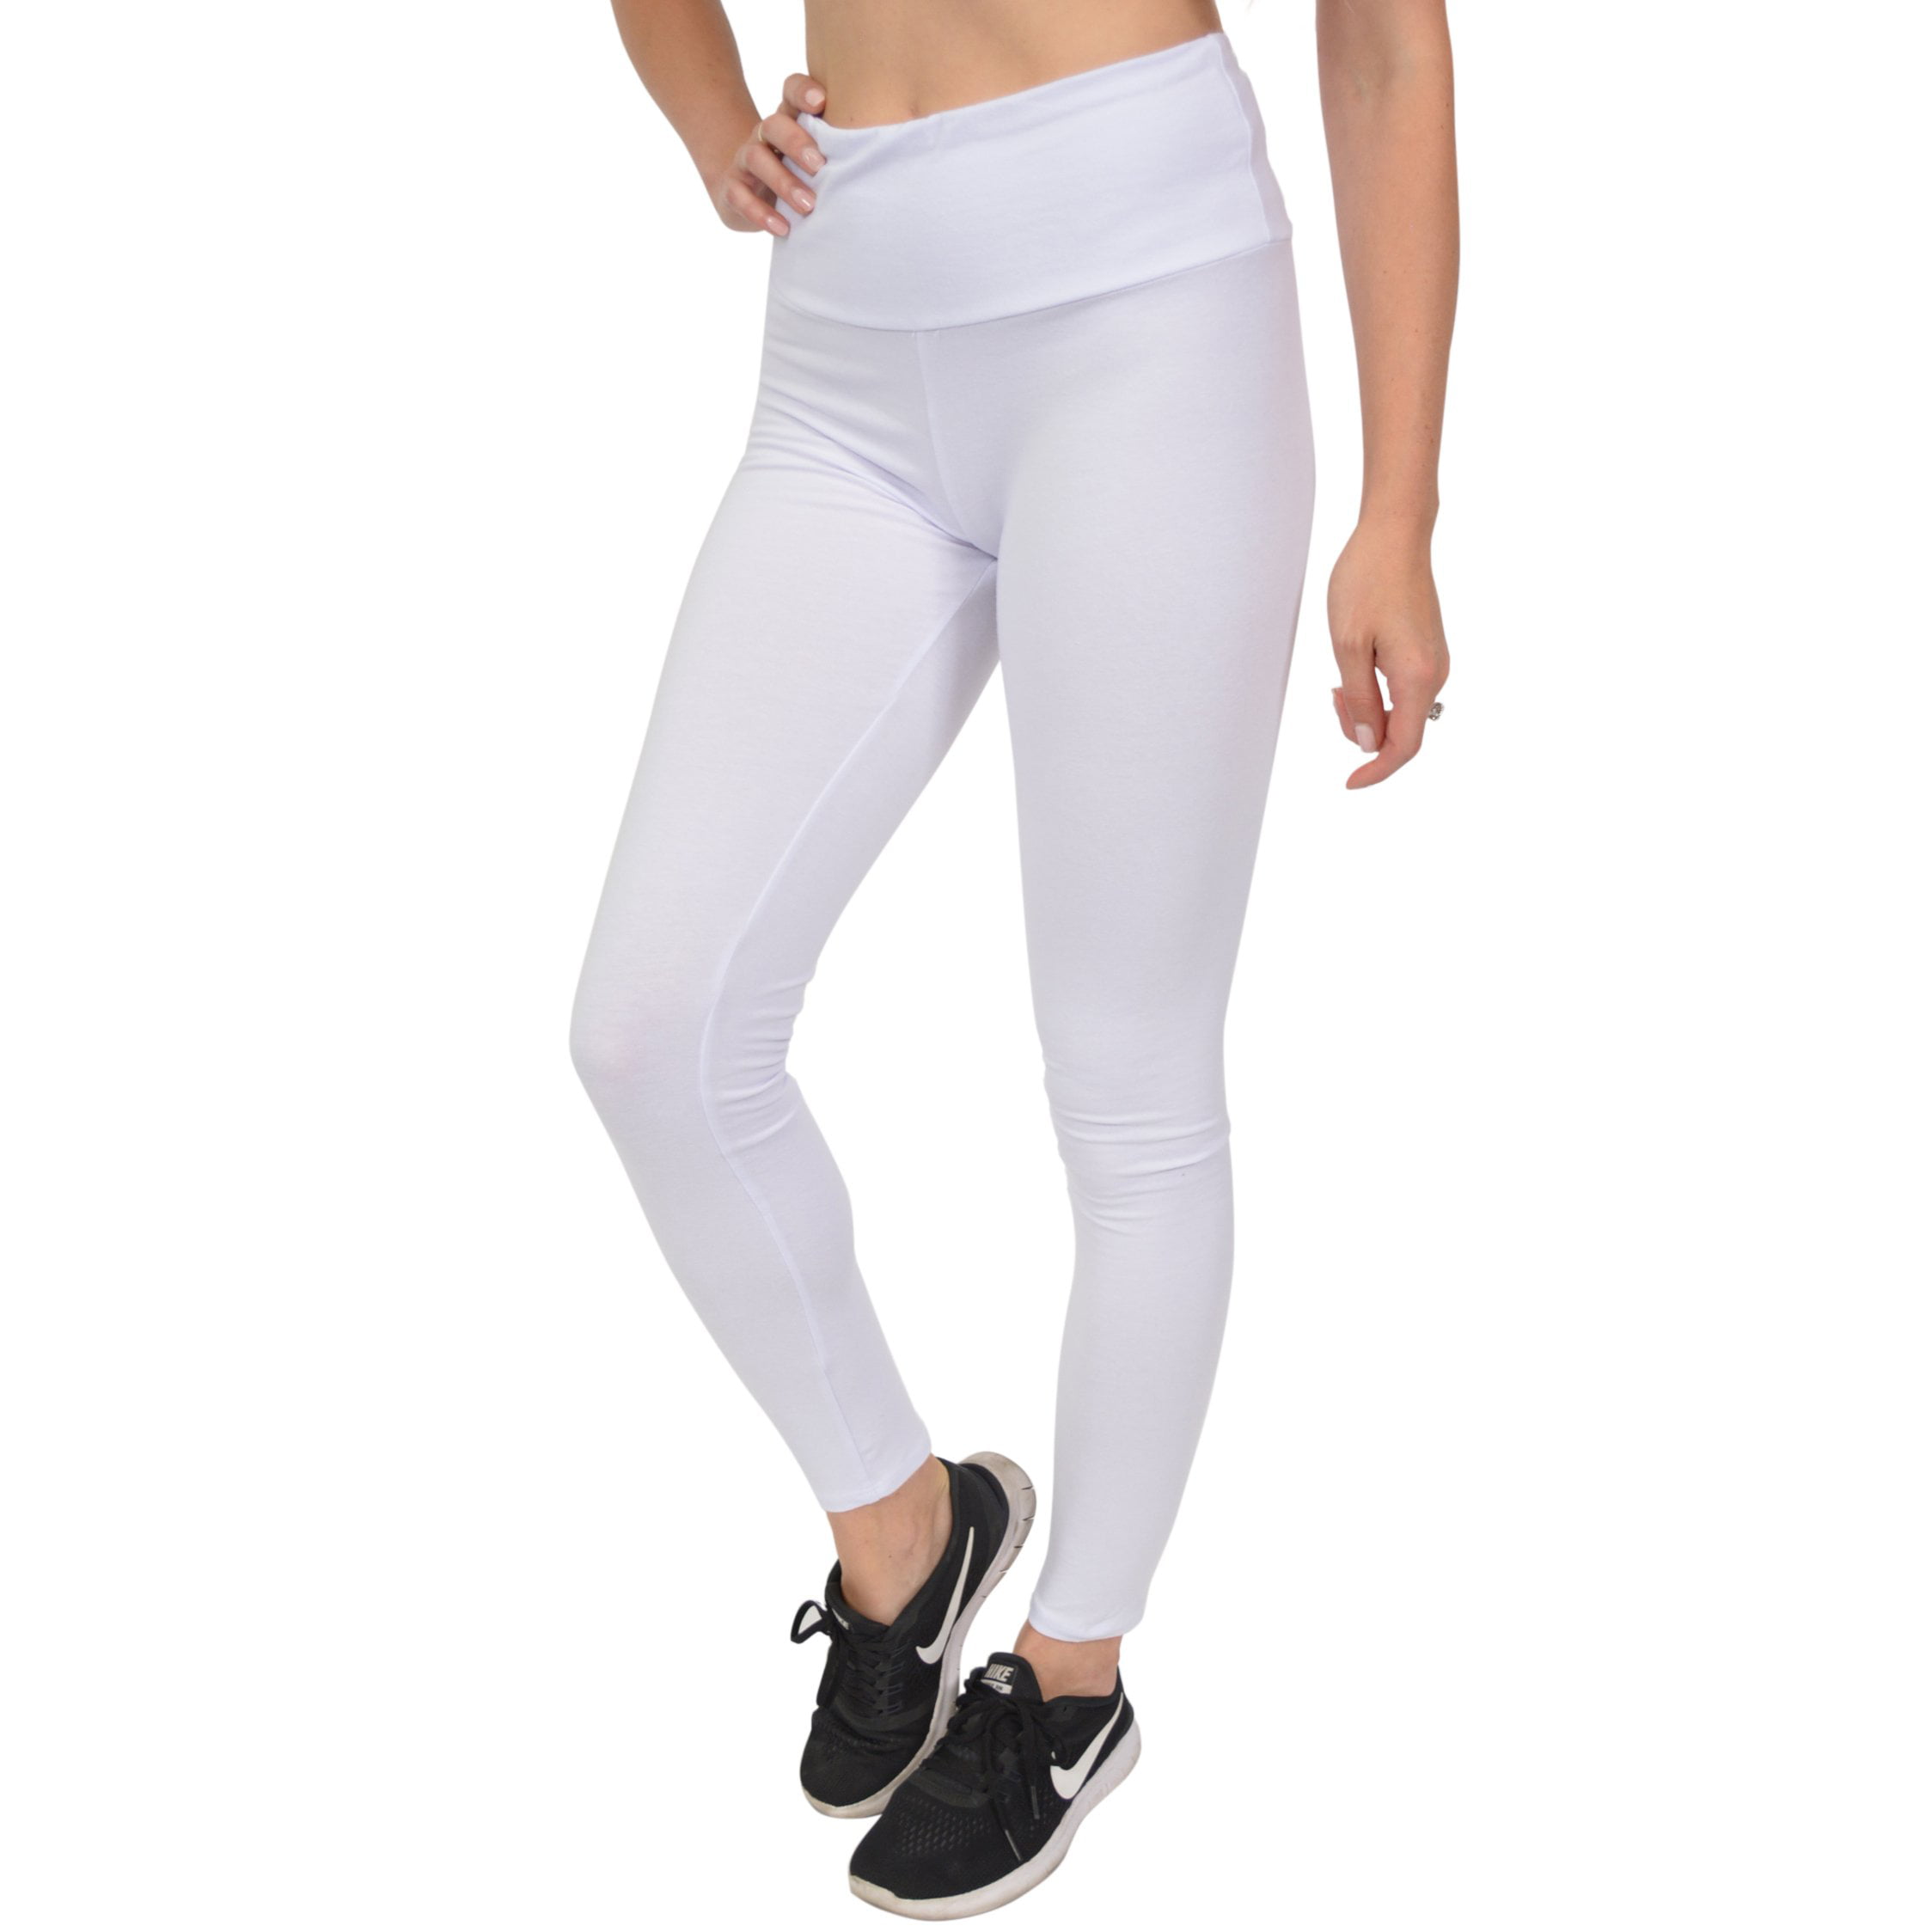 Stretch Is Comfort Stretch Is Comfort Womens High Waist Cotton